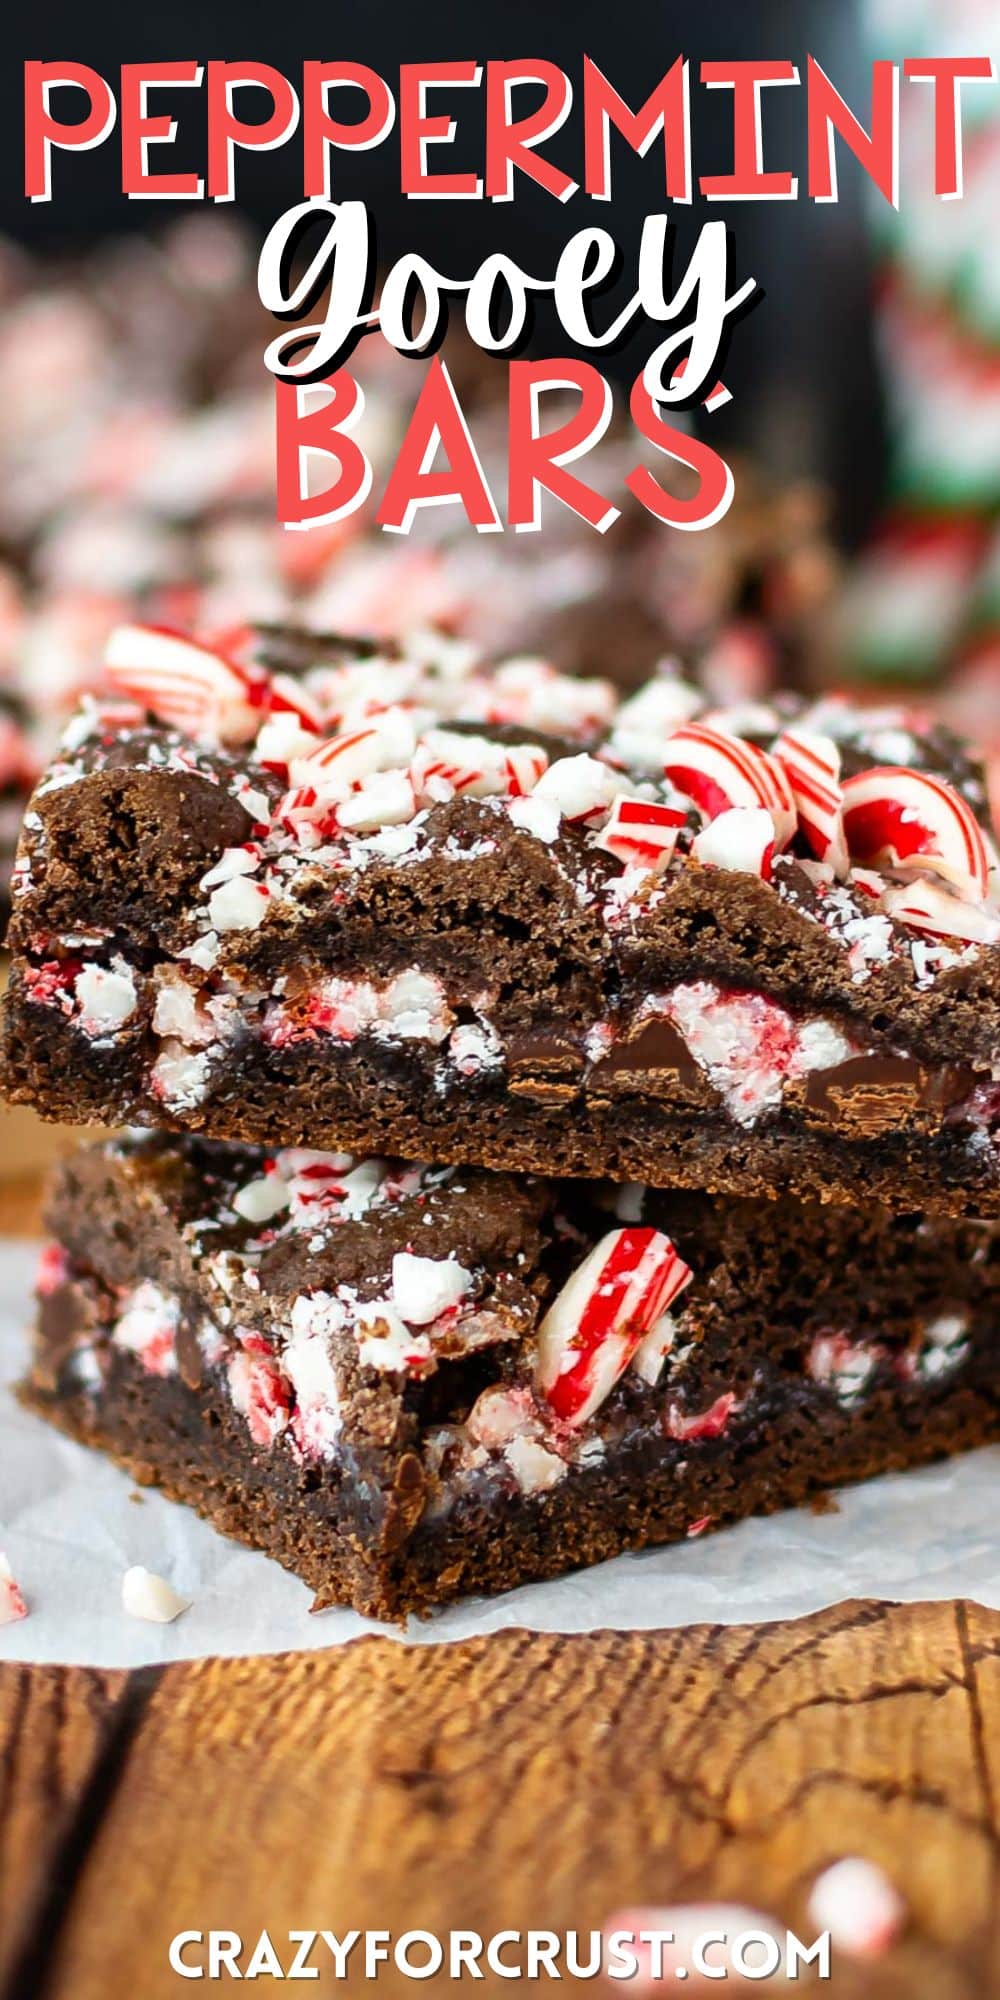 stacked brownies with peppermint crushed on top with words on the image.